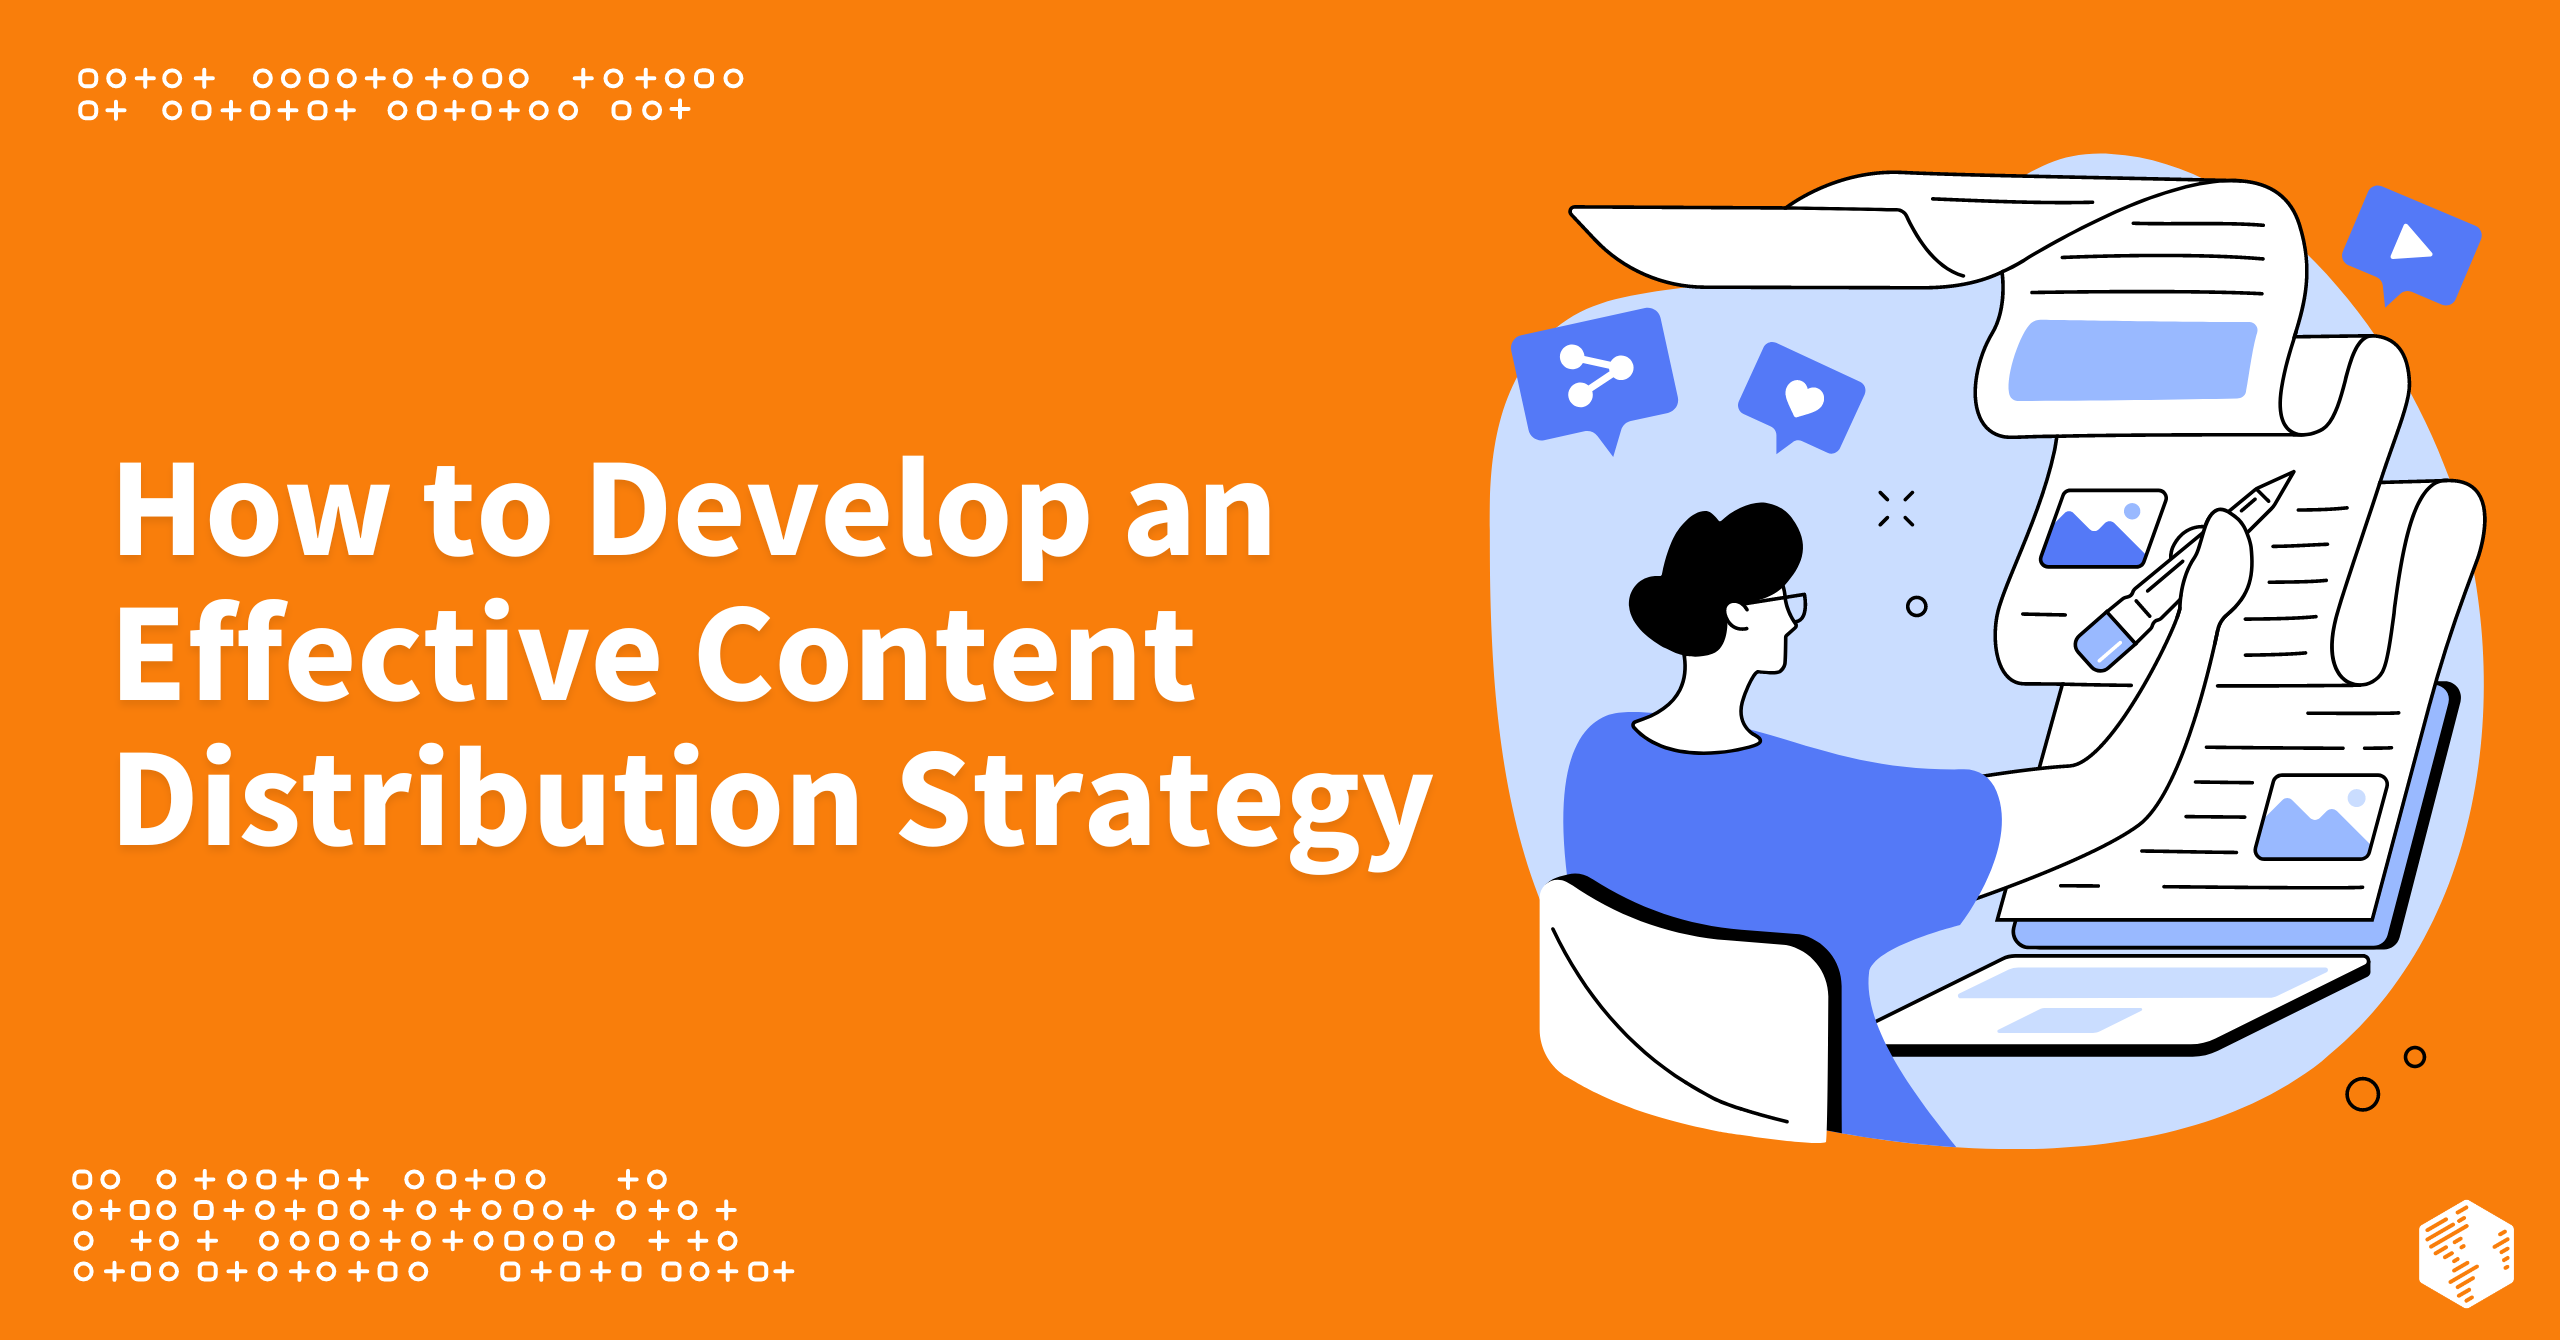 How to Develop an Effective Content Distribution Strategy